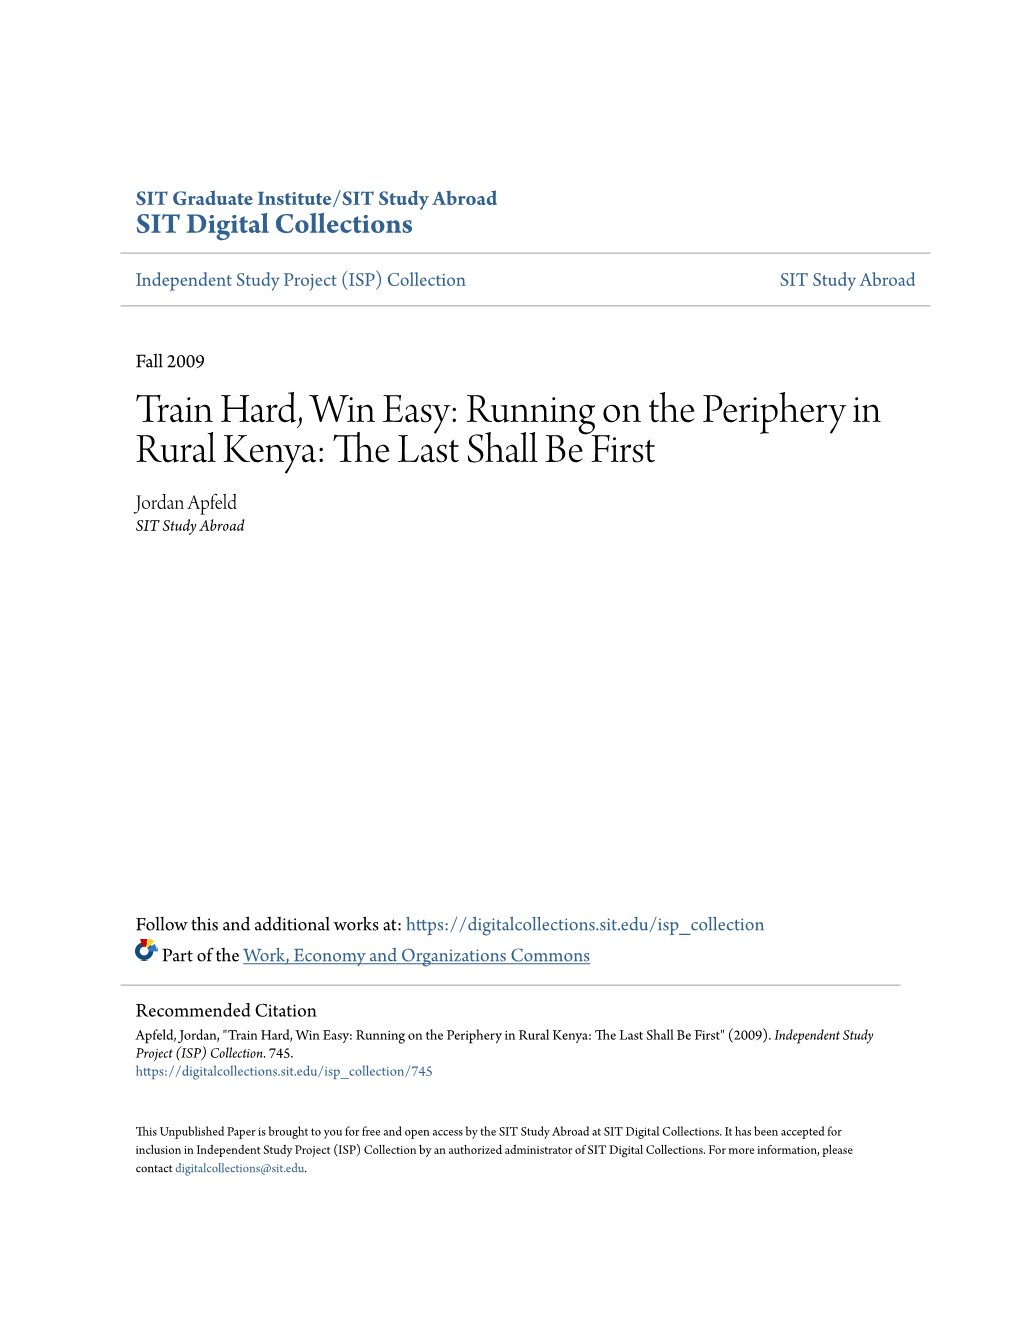 Train Hard, Win Easy: Running on the Periphery in Rural Kenya: the Last Shall Be First Jordan Apfeld SIT Study Abroad